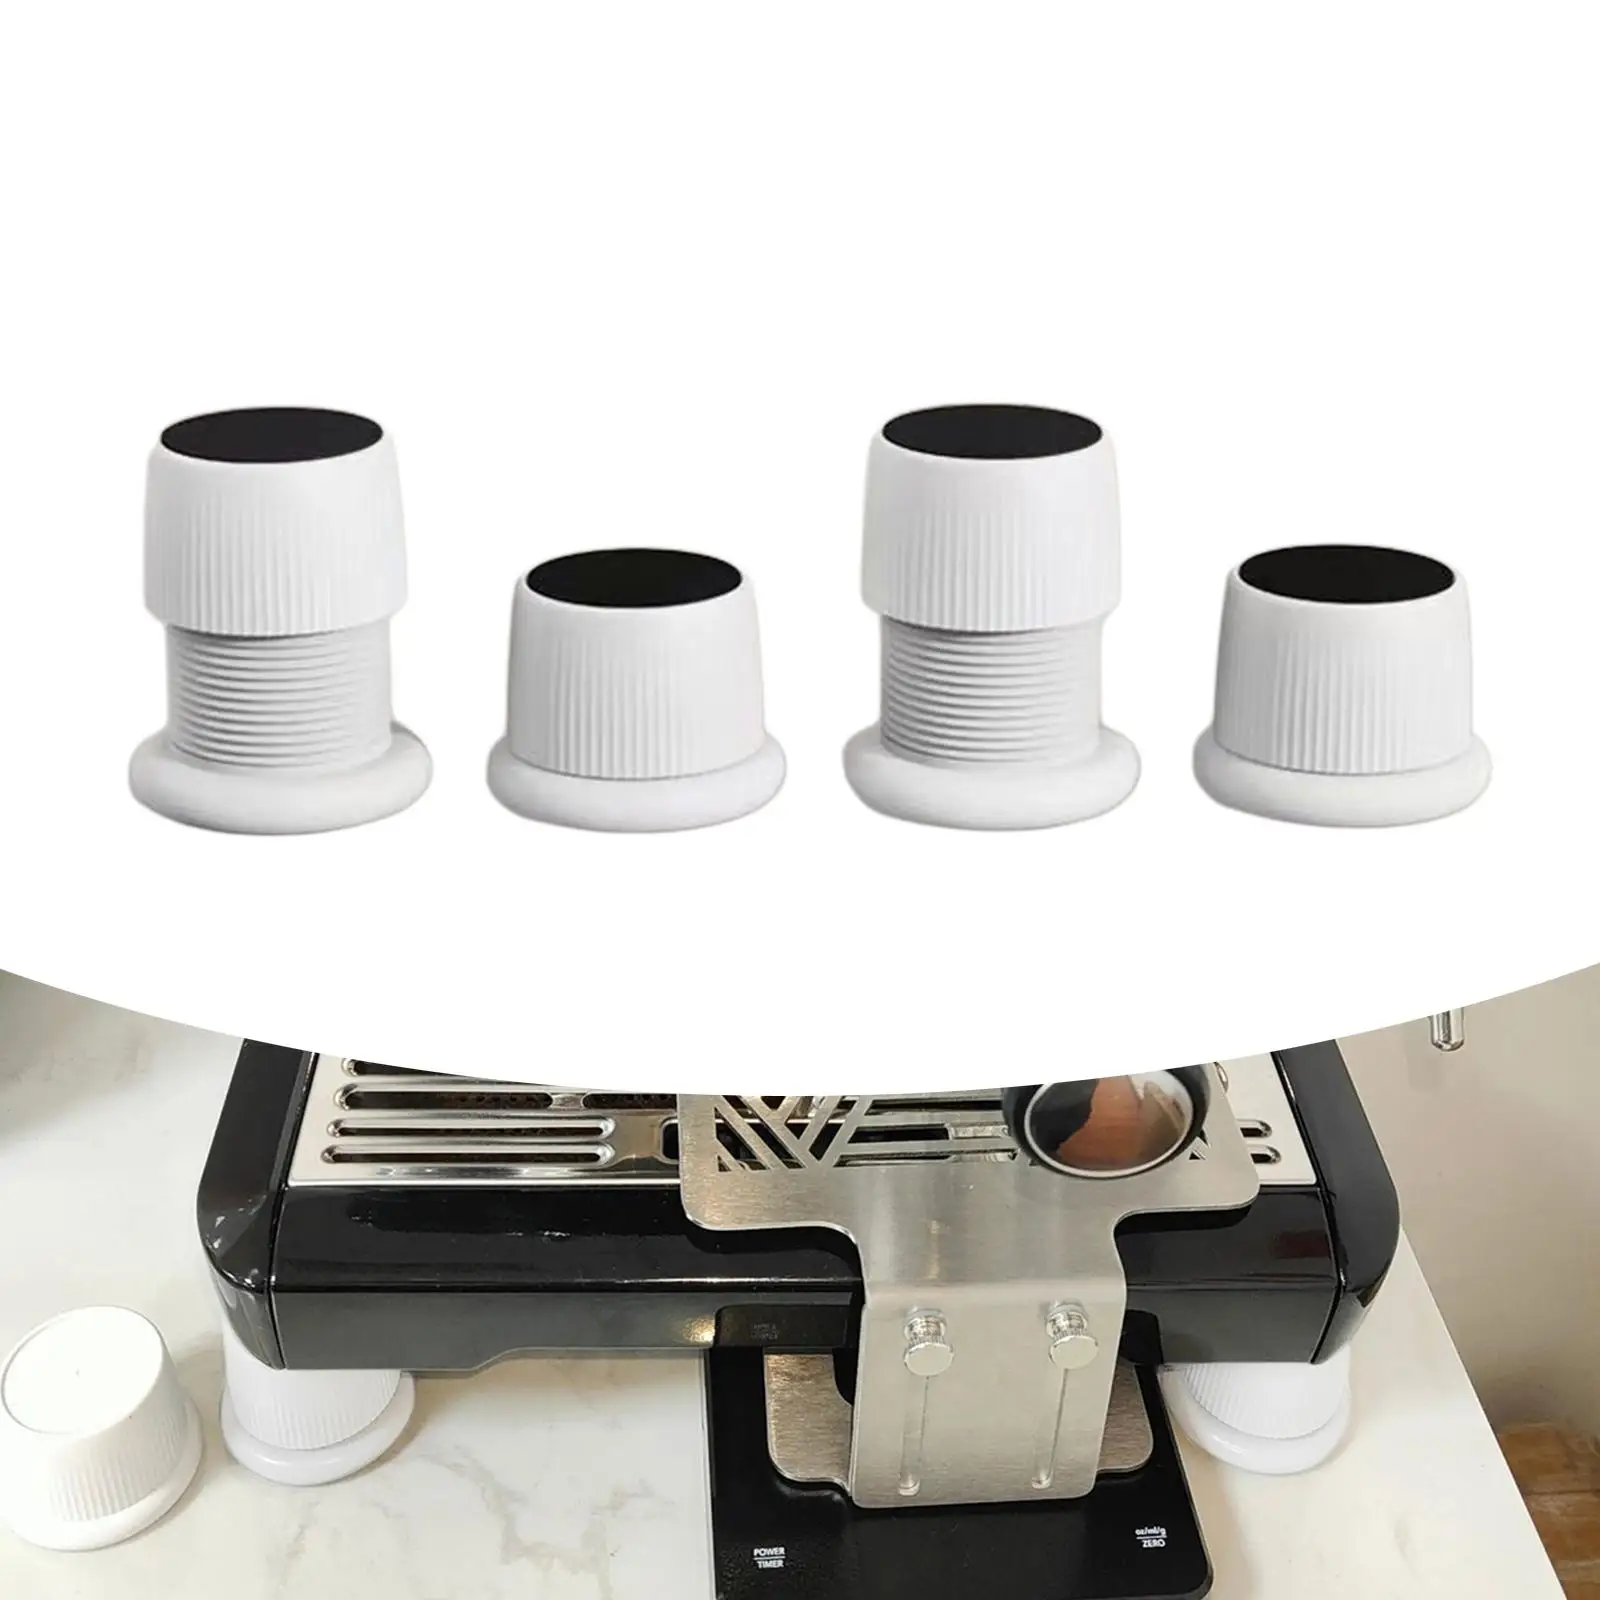 4x Heighten Plastic Isolation Feet Vibration Reduction Anti Vibration Pads Support Protects Pedestals for Espresso Machine